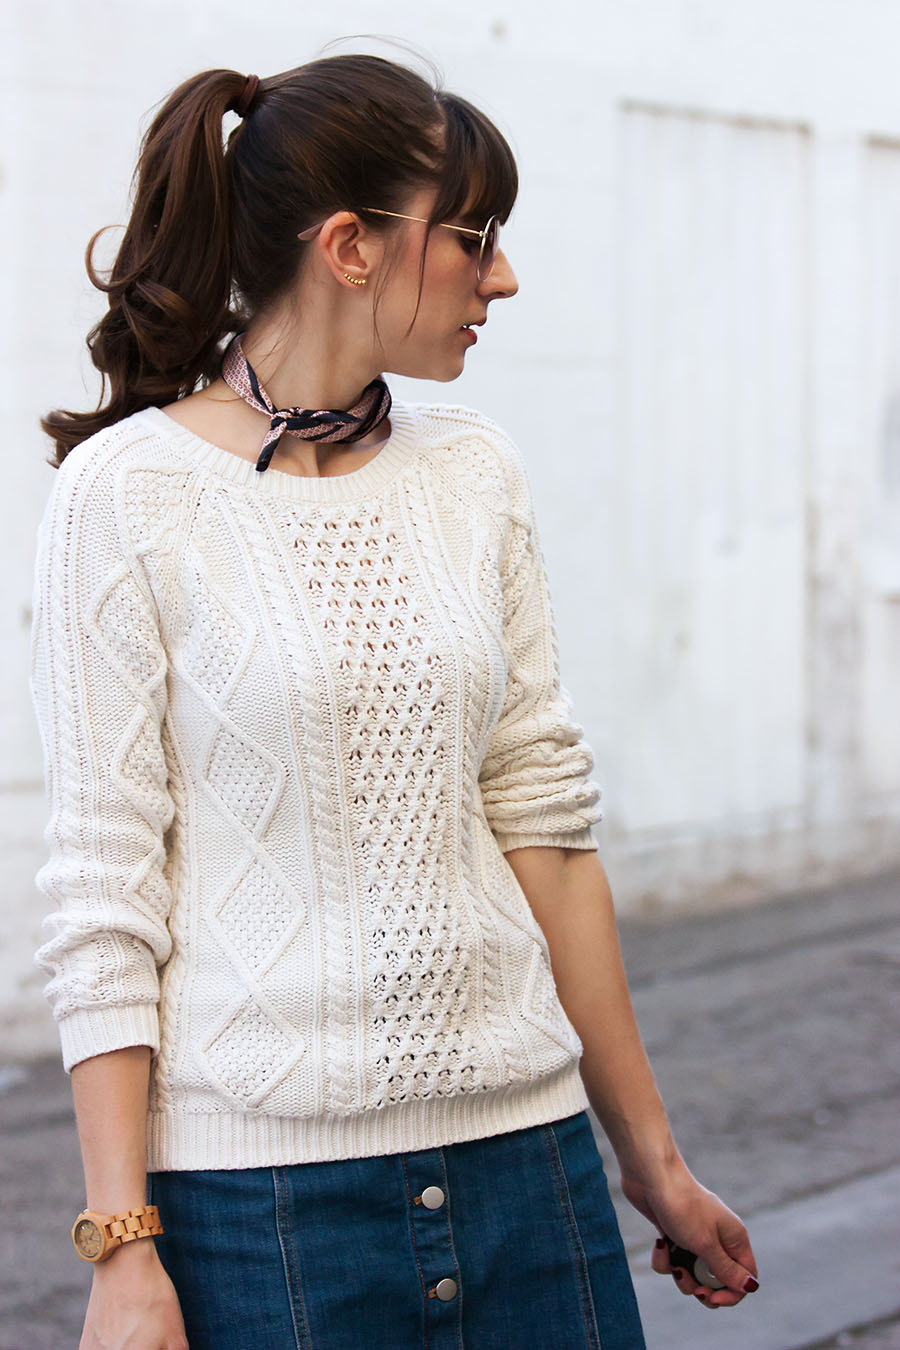 Neck Scarf, Sweater with Mini Skirt